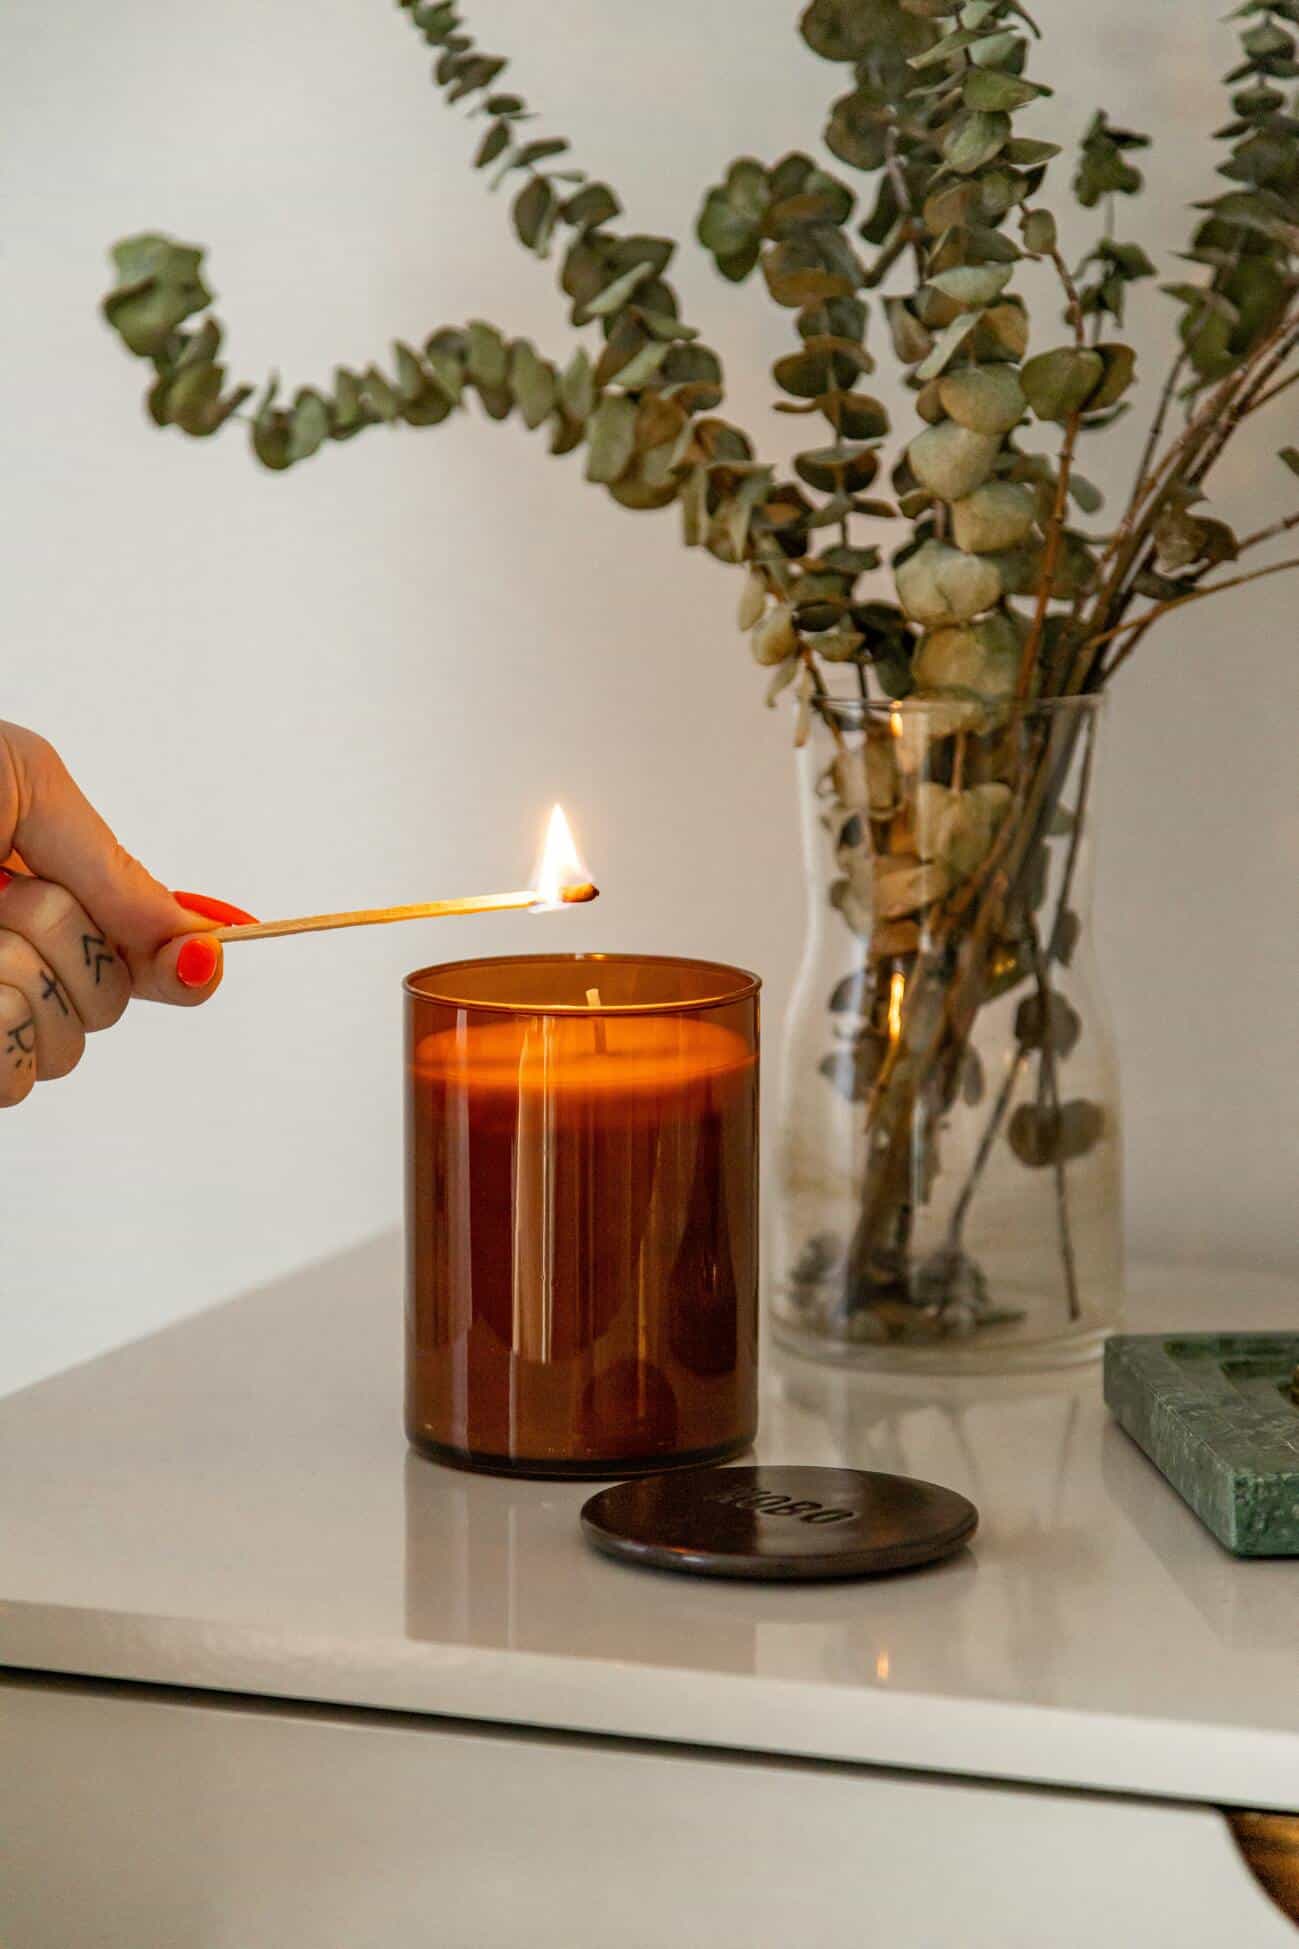 person lighting a candle on the table